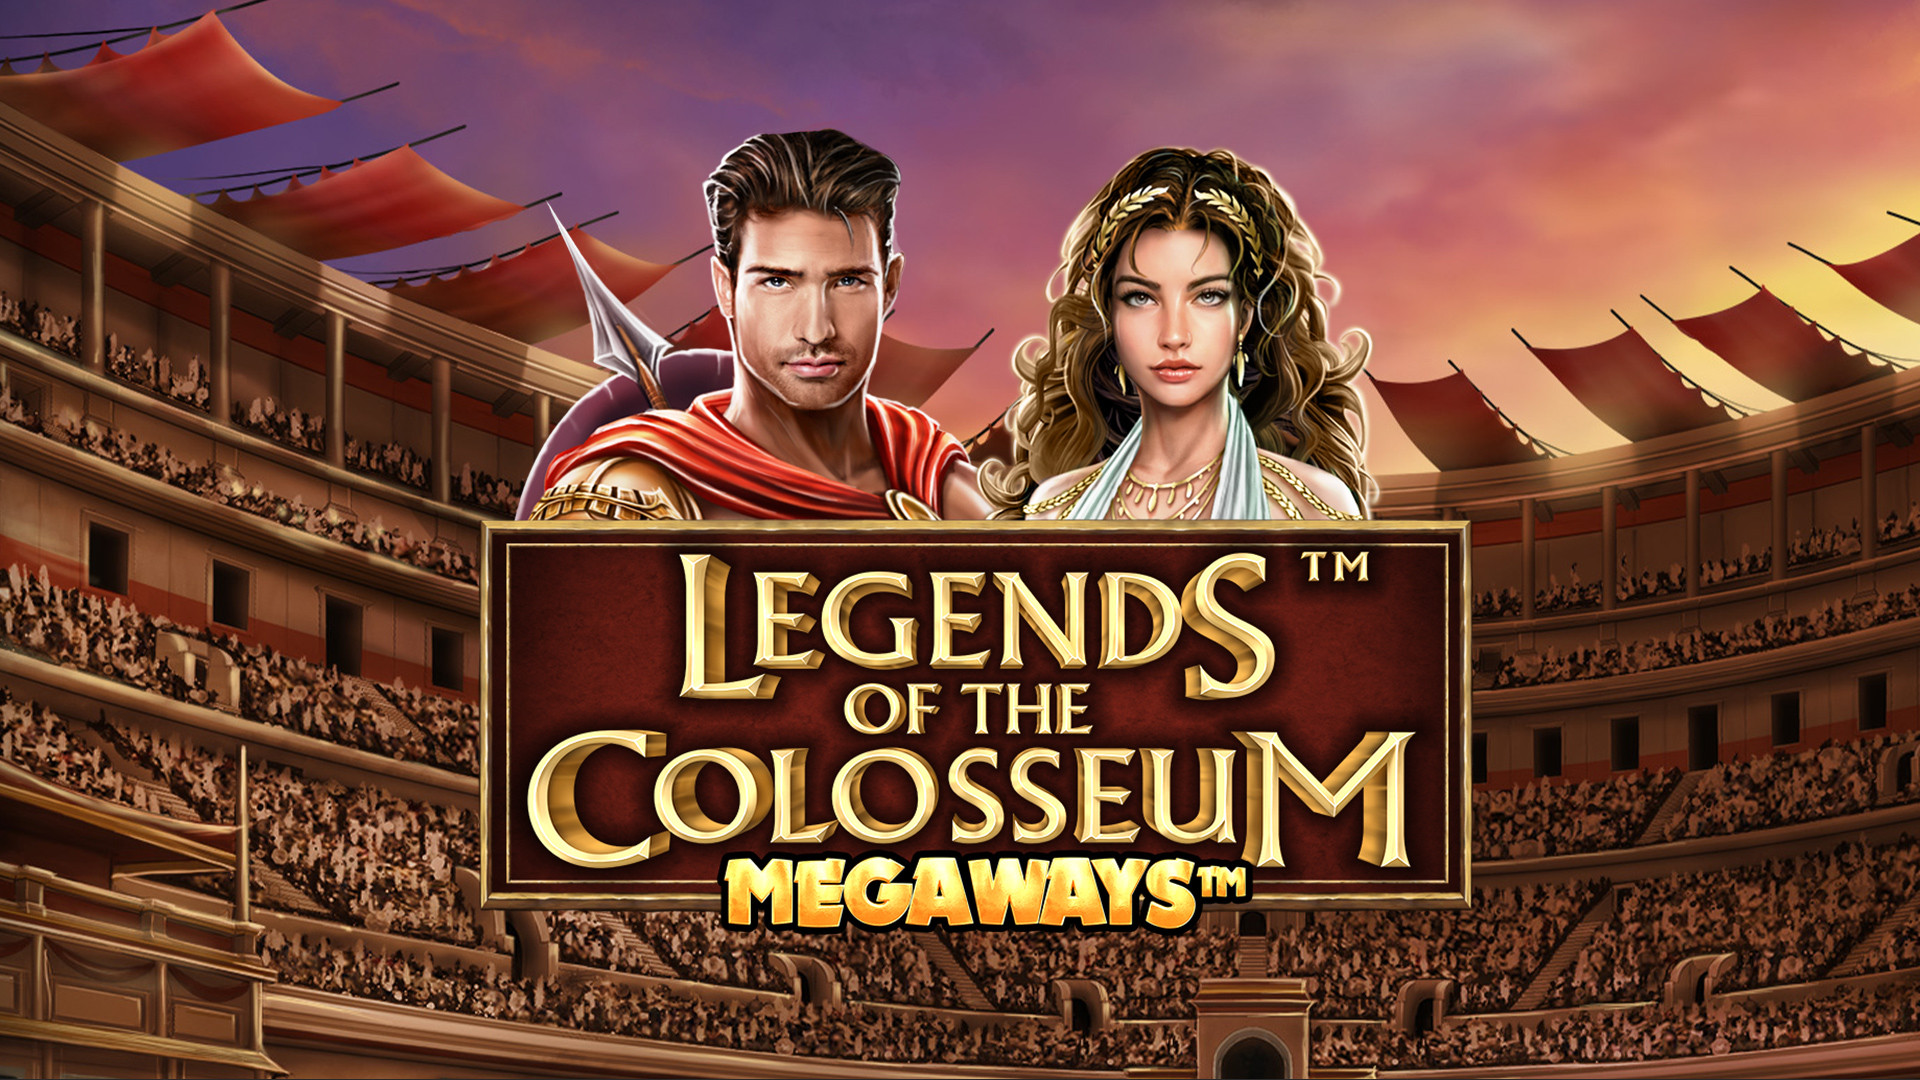 Legends of the Colosseum MEGAWAYS